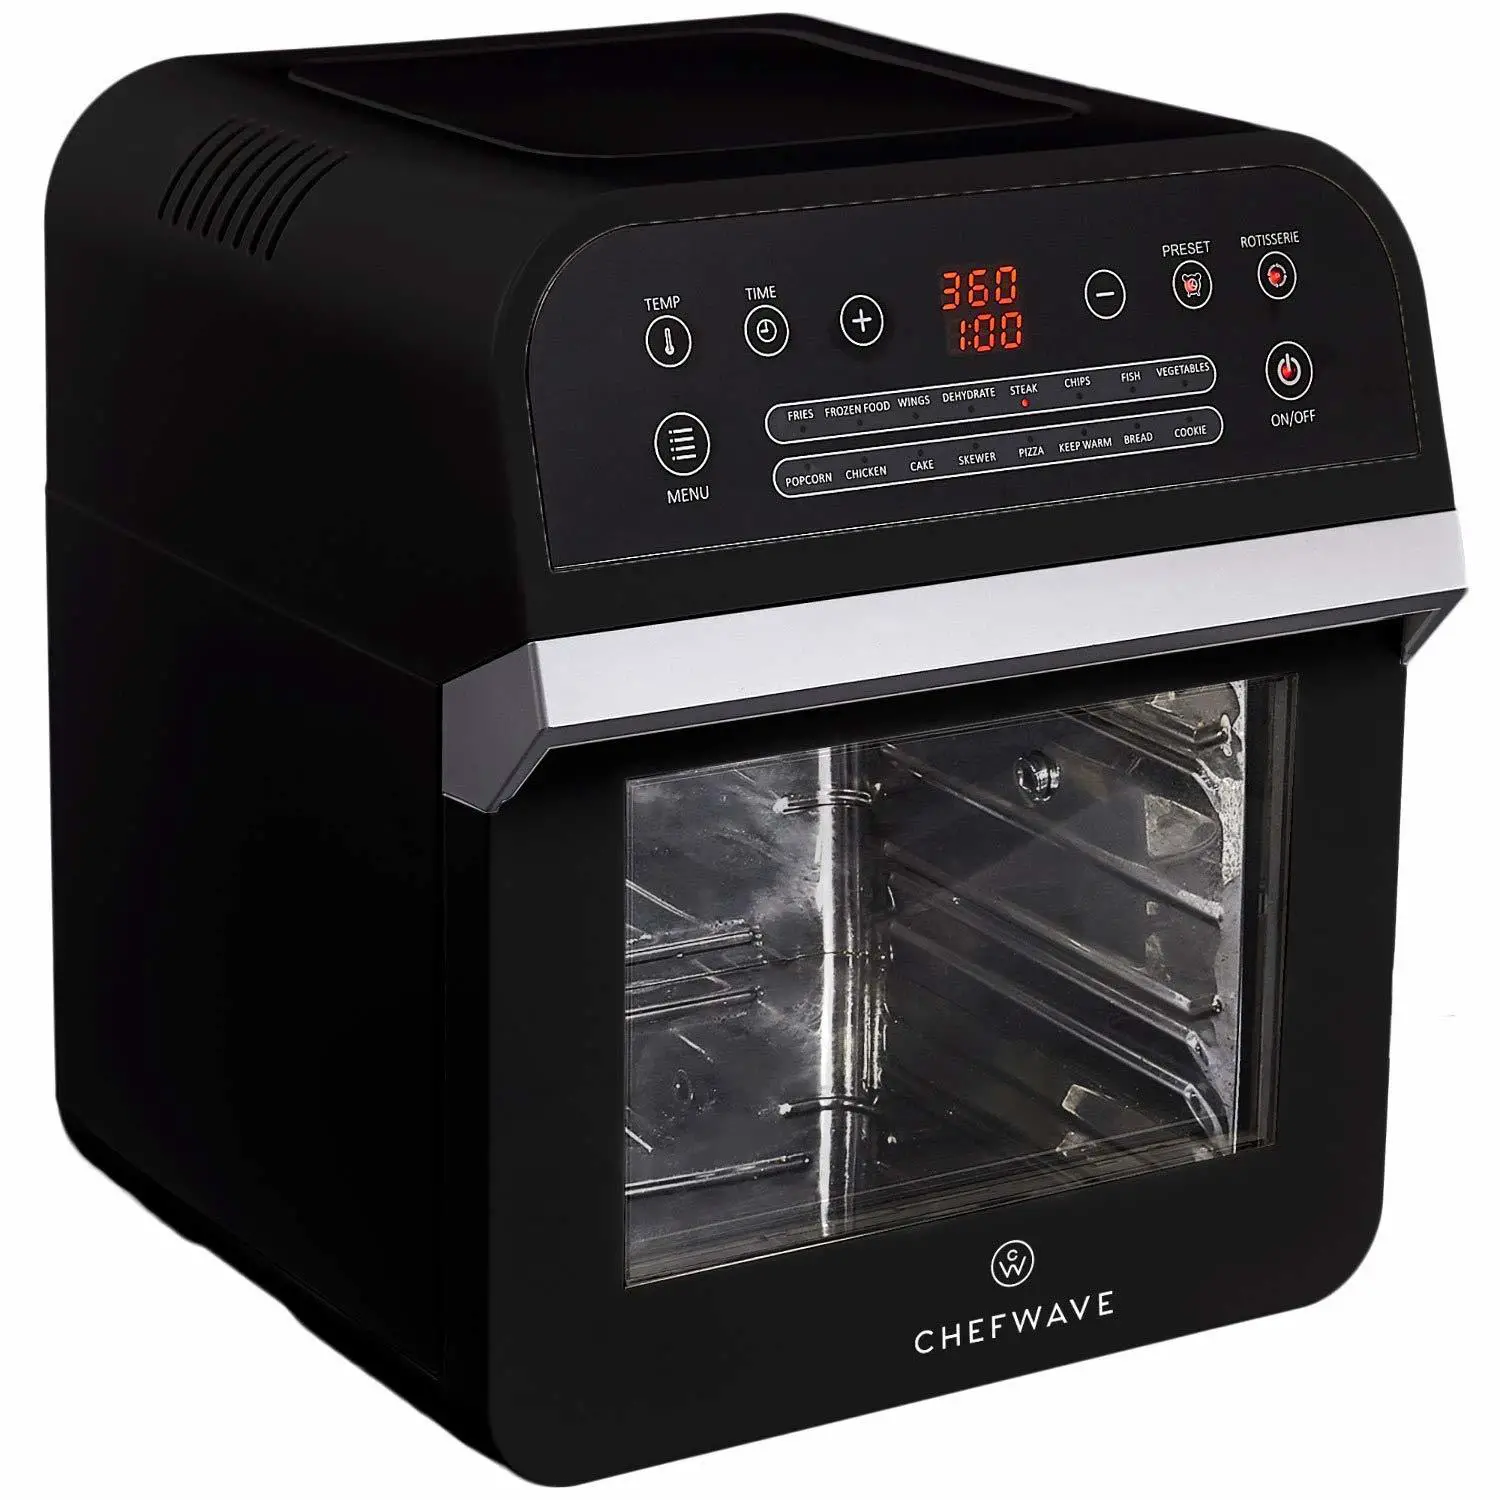 ChefWave 12.6 Quart Air Fryer, Rotisserie and Dehydrator ...